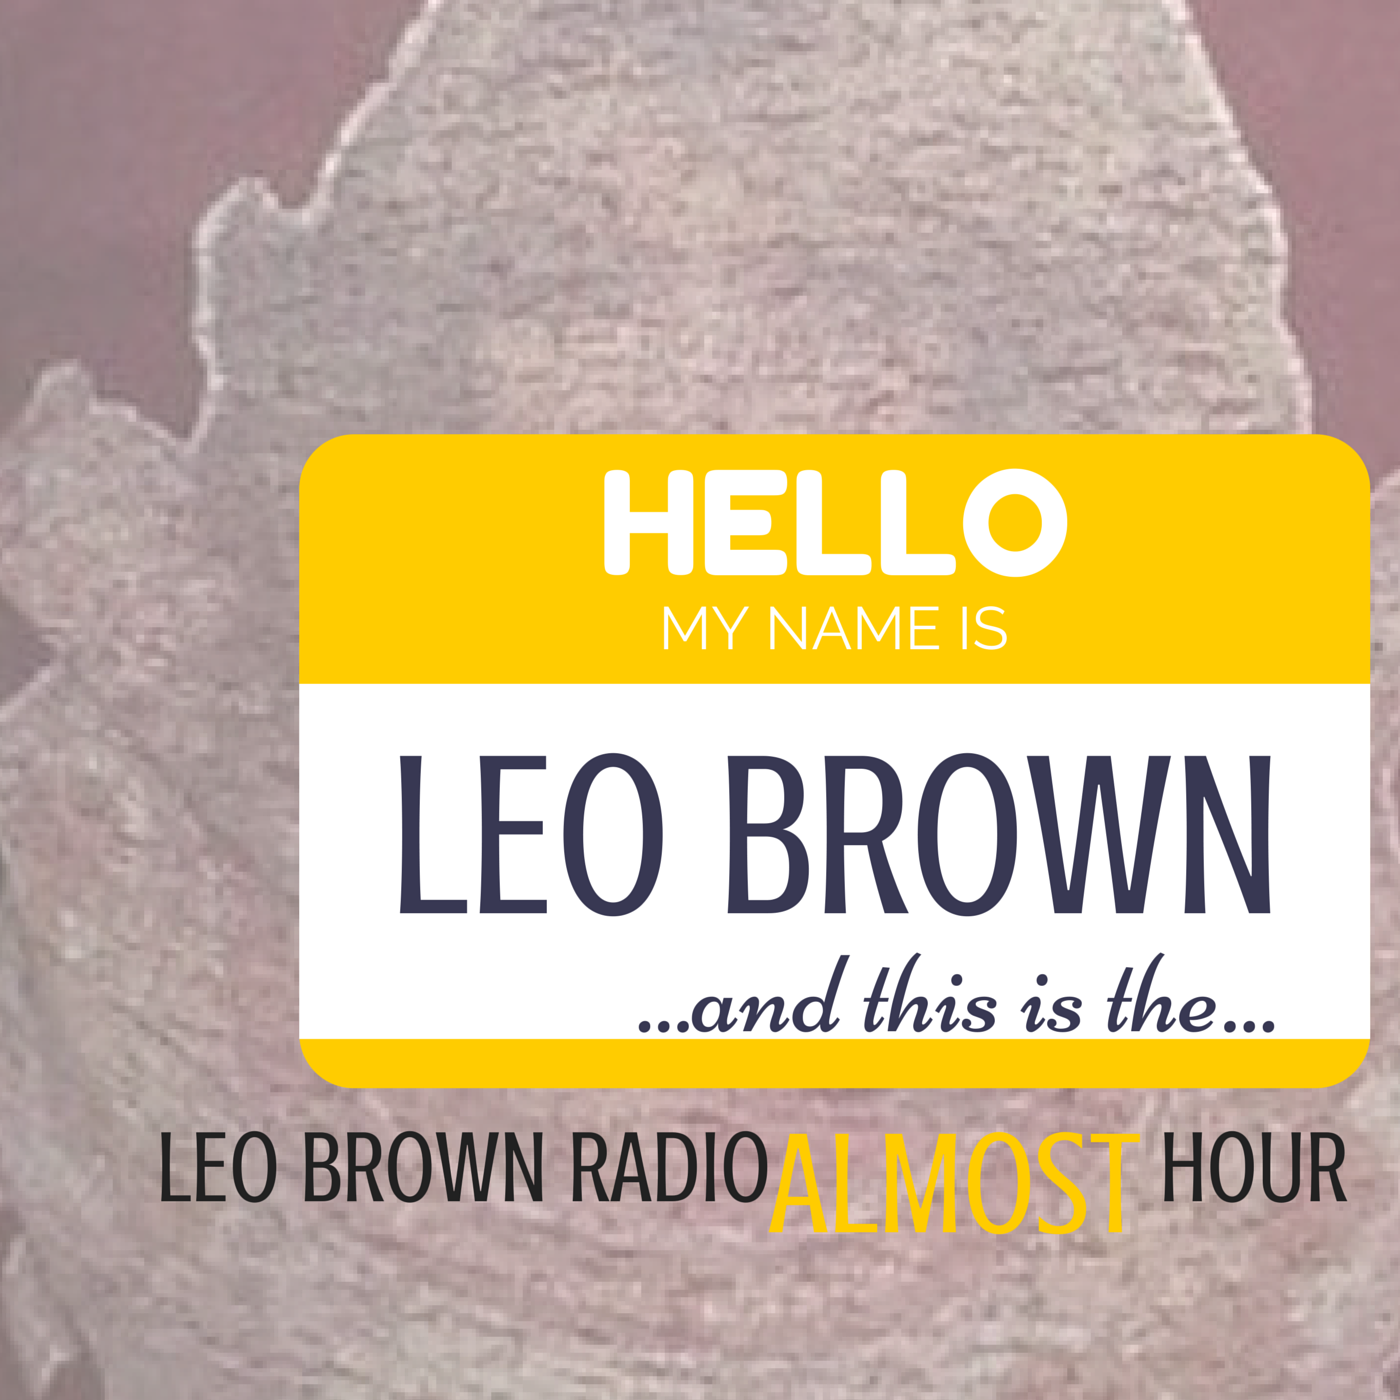 Leo Brown Almost Hour 03/10/17